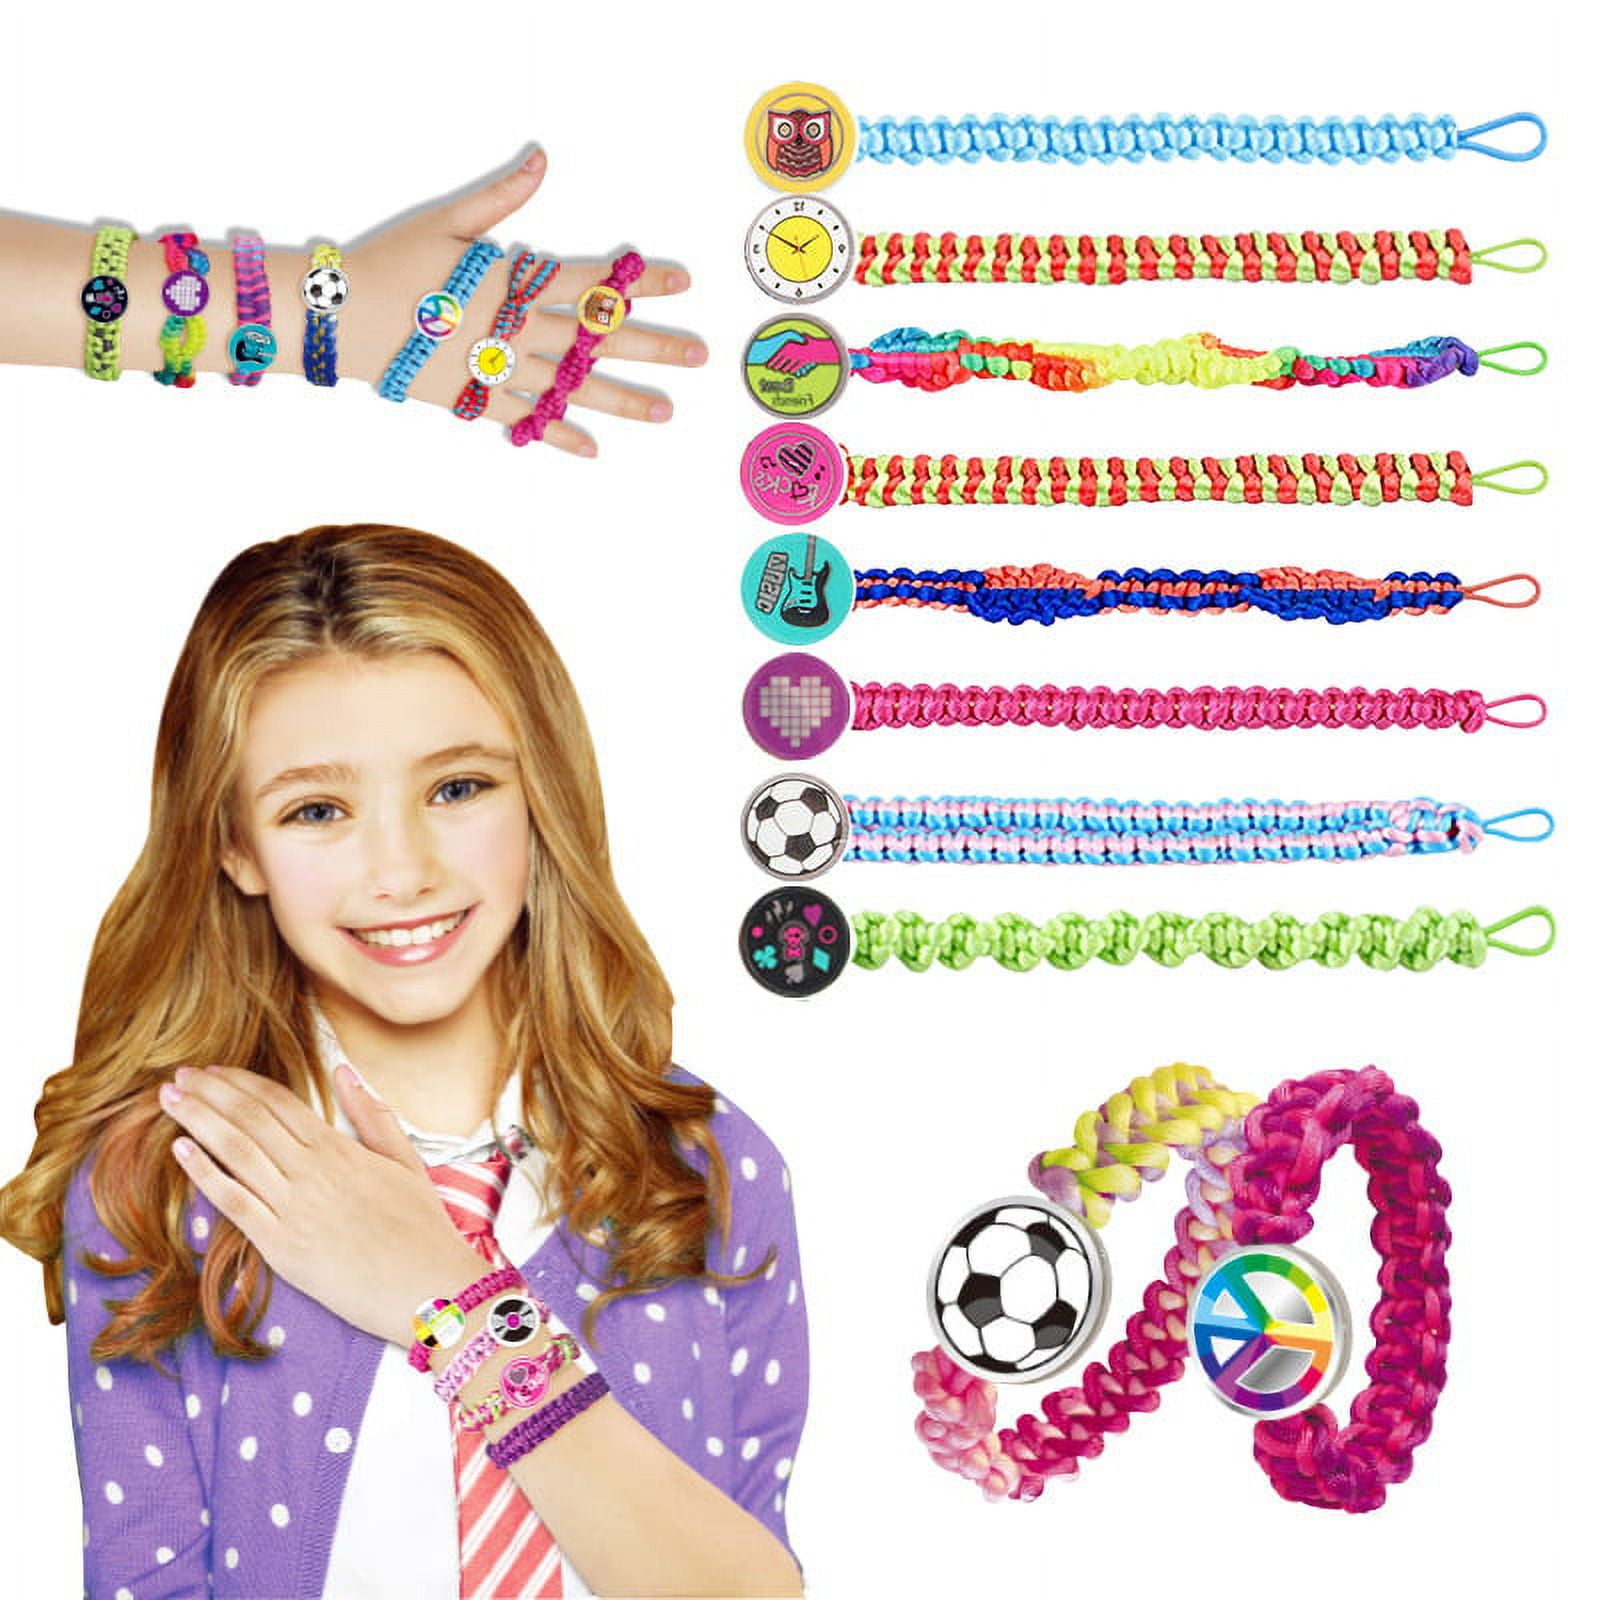 Lina Bracelet Making Kit for Girls, Arts and Crafts Toys for Kids Age 6